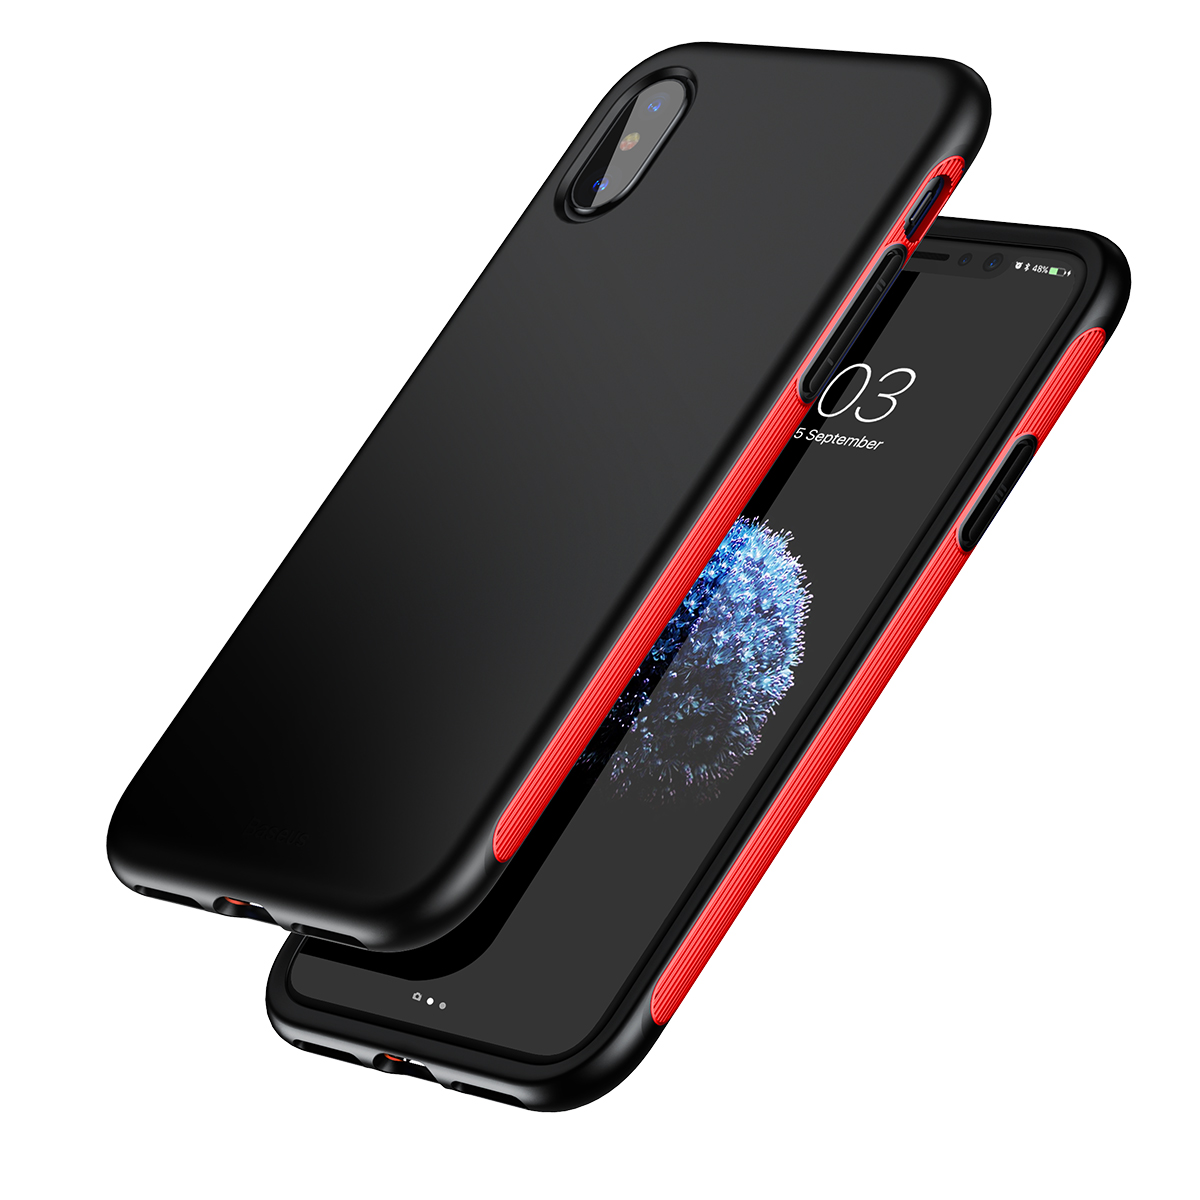 

Baseus Bumper Shockproof Soft TPU TPE Case Cover for iPhone X